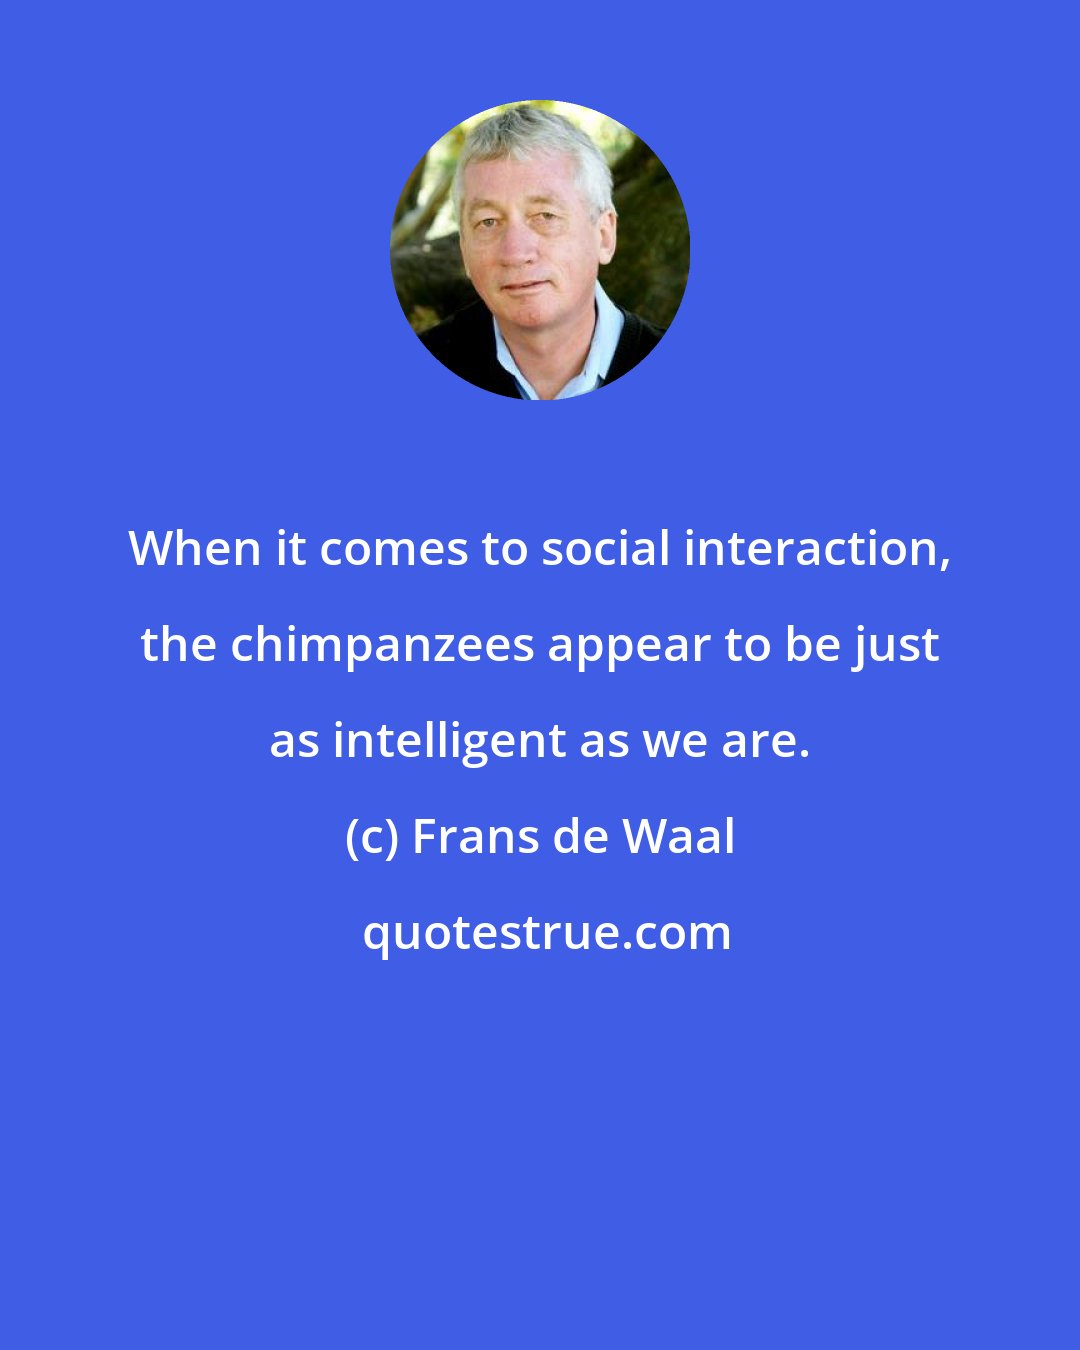 Frans de Waal: When it comes to social interaction, the chimpanzees appear to be just as intelligent as we are.